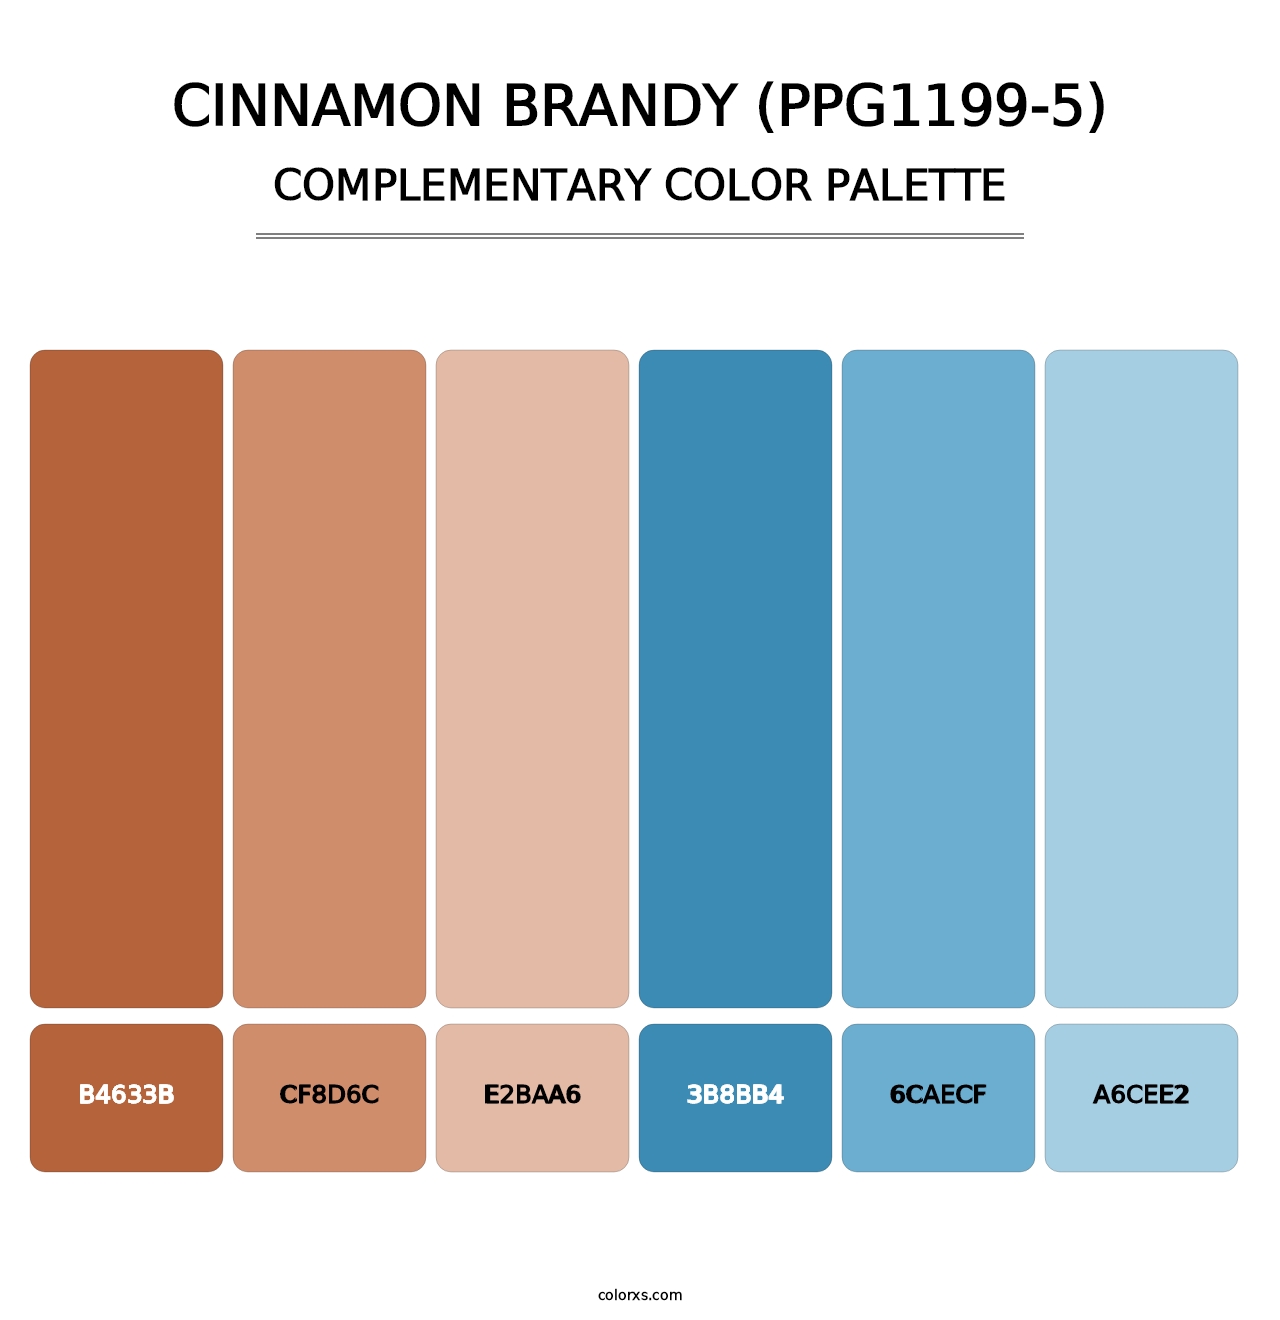 Cinnamon Brandy (PPG1199-5) - Complementary Color Palette